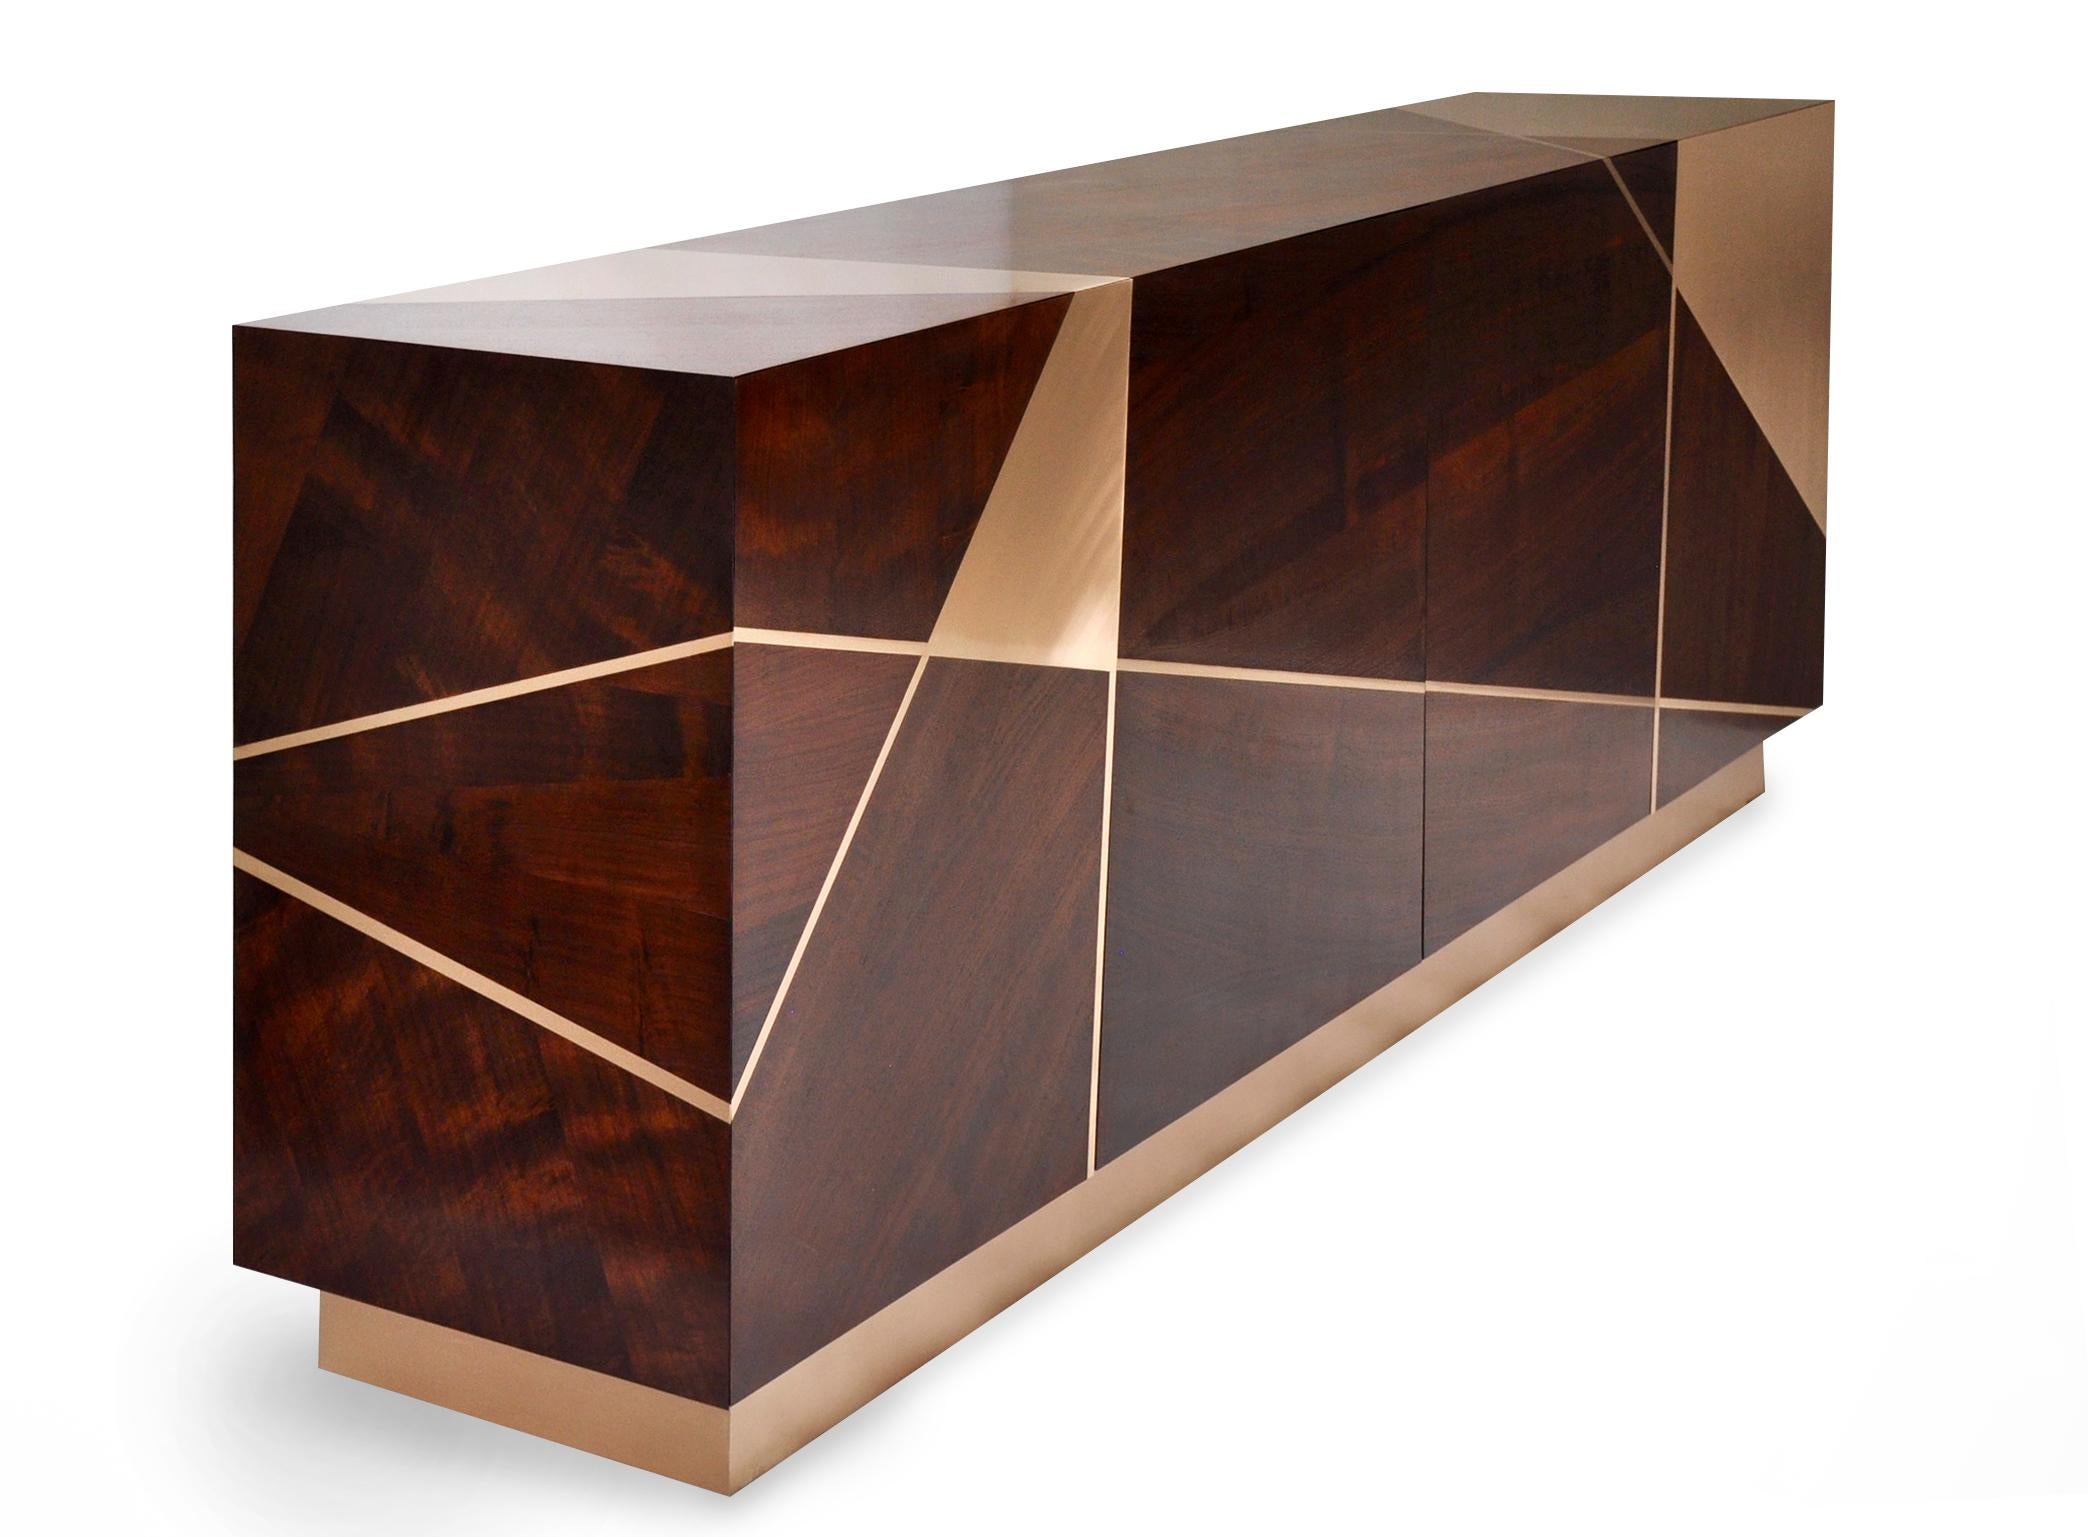 The Ray cabinet in Analine dyed Claro Walnut and Bronze with a bronze base demonstrates an elegant use of the Ray design, walnut, and bronze. A bronze panel wraps the uppermost front corner of the cabinet. The bronze clad corners add to the beauty,